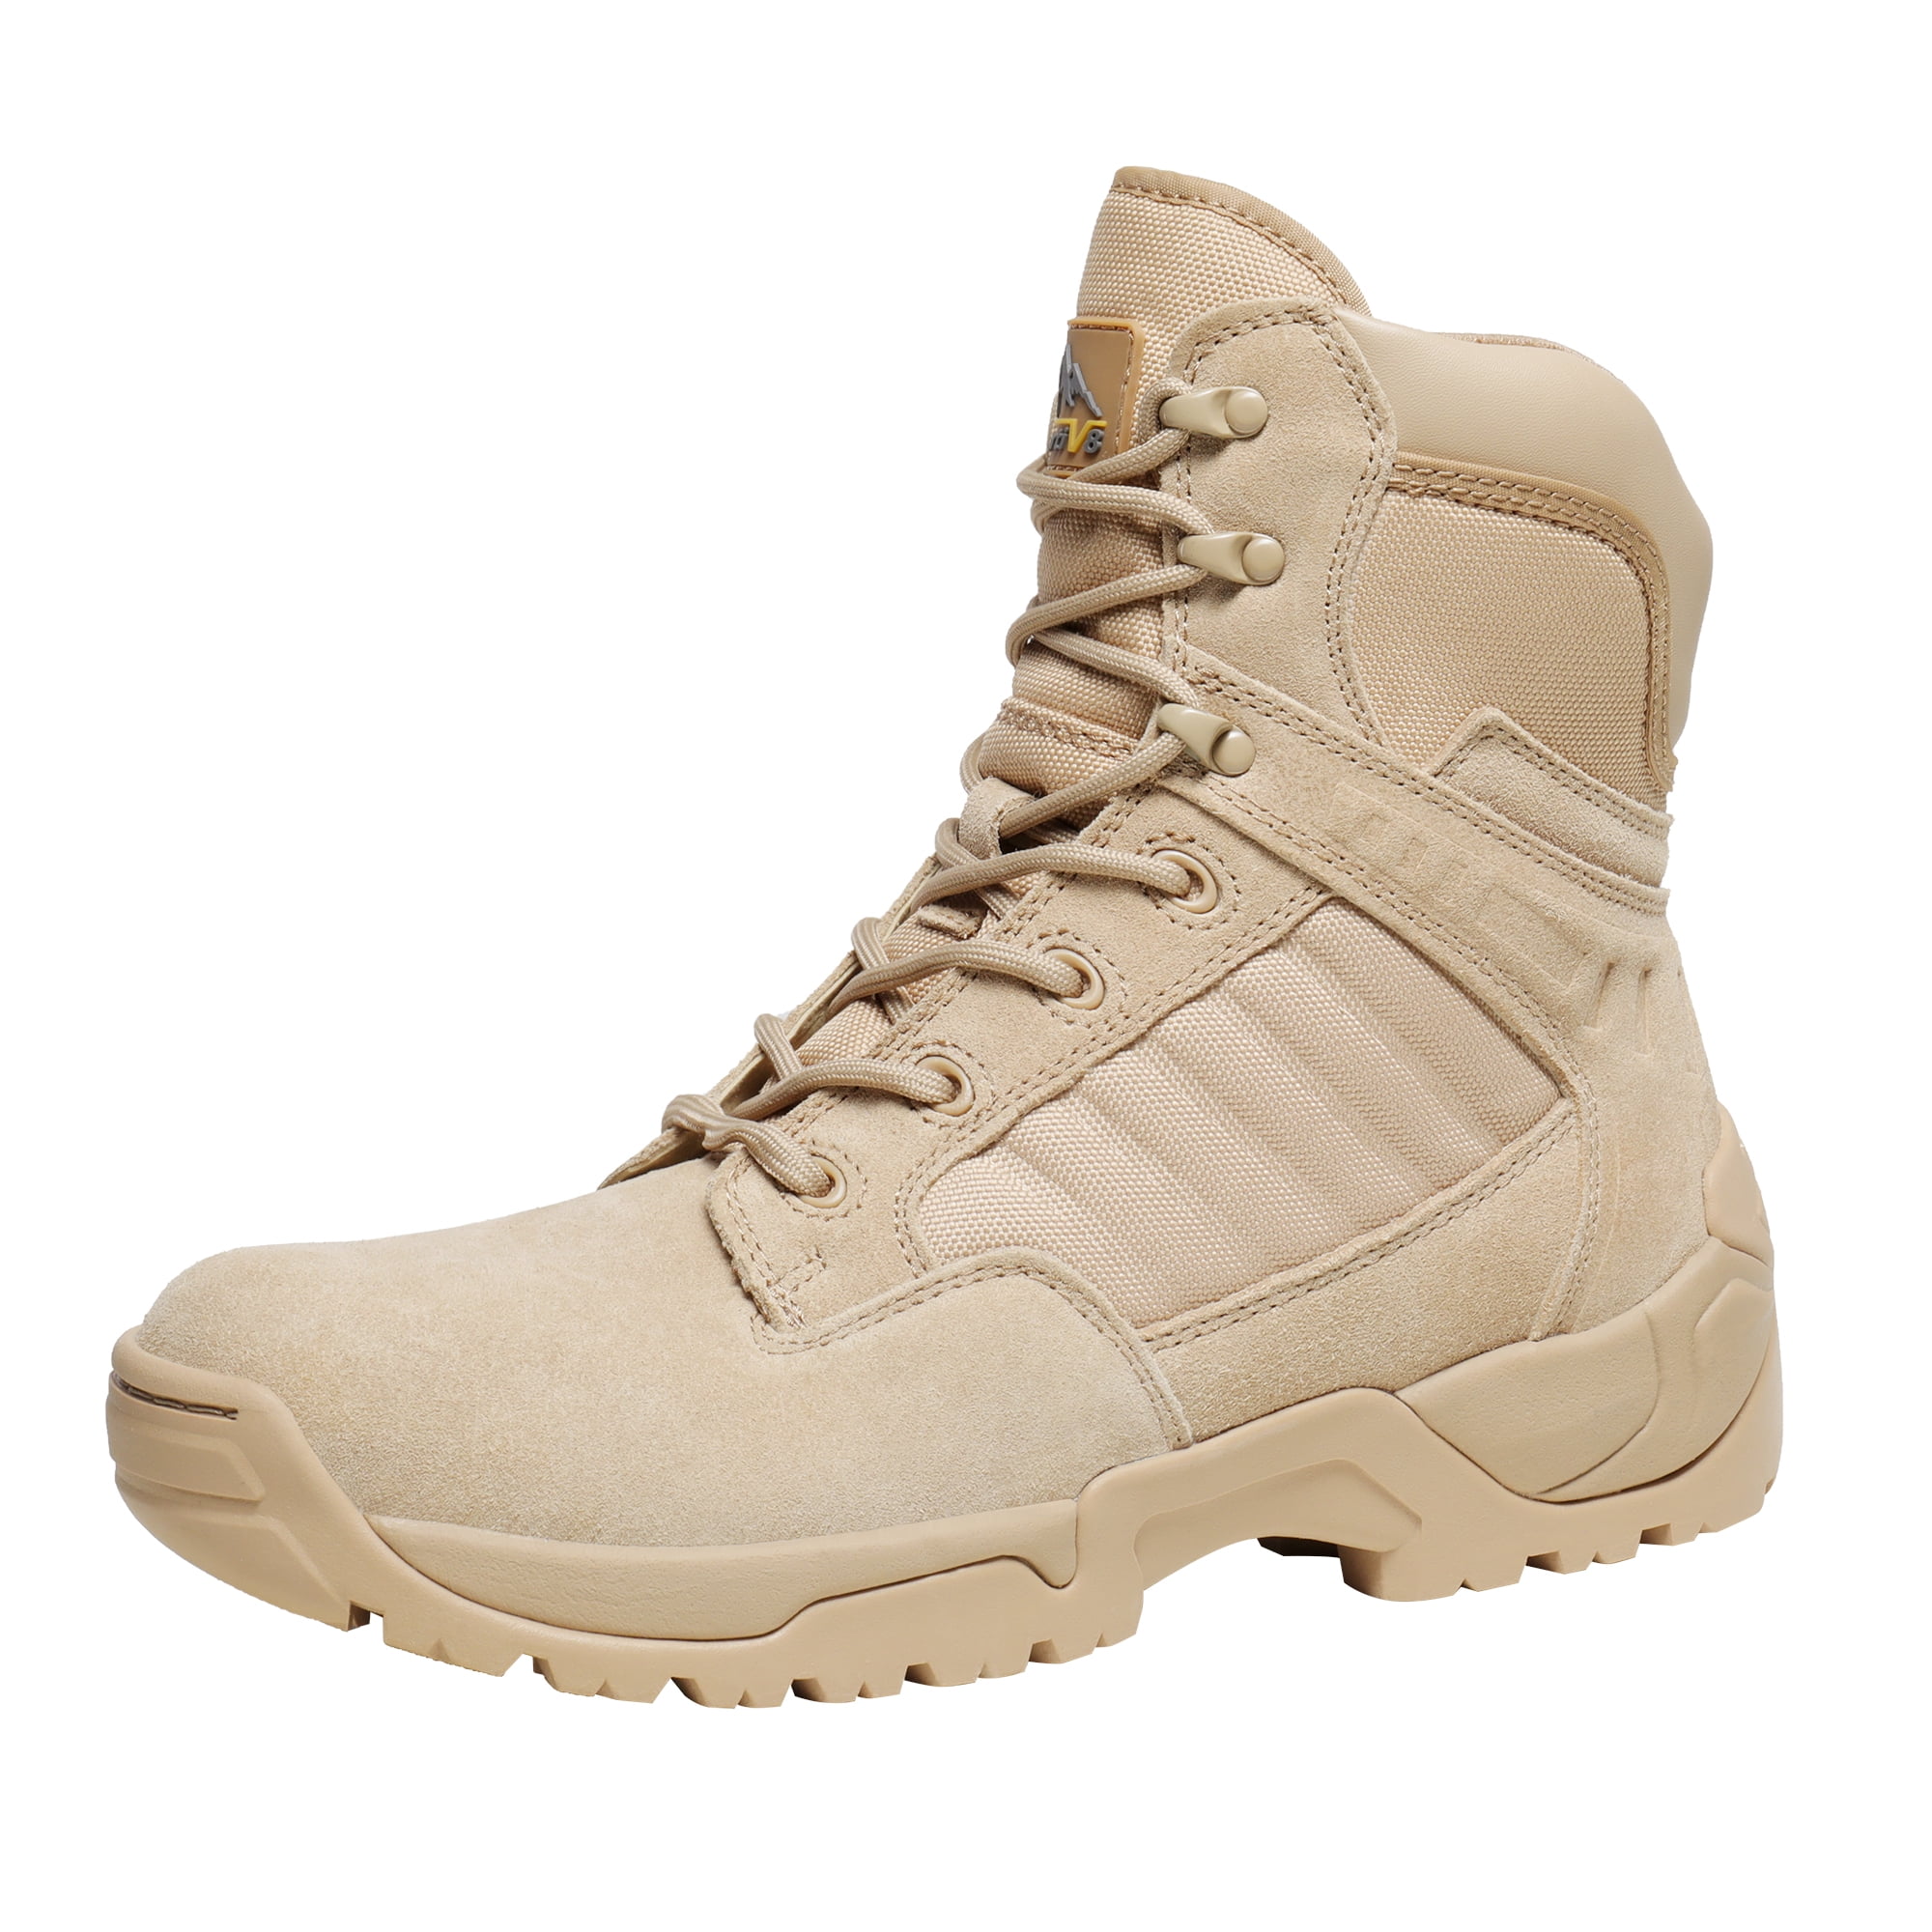 Mens Tactical SWAT Military Duty Desert Work Boots Combat Hiking Army Shoes Size 